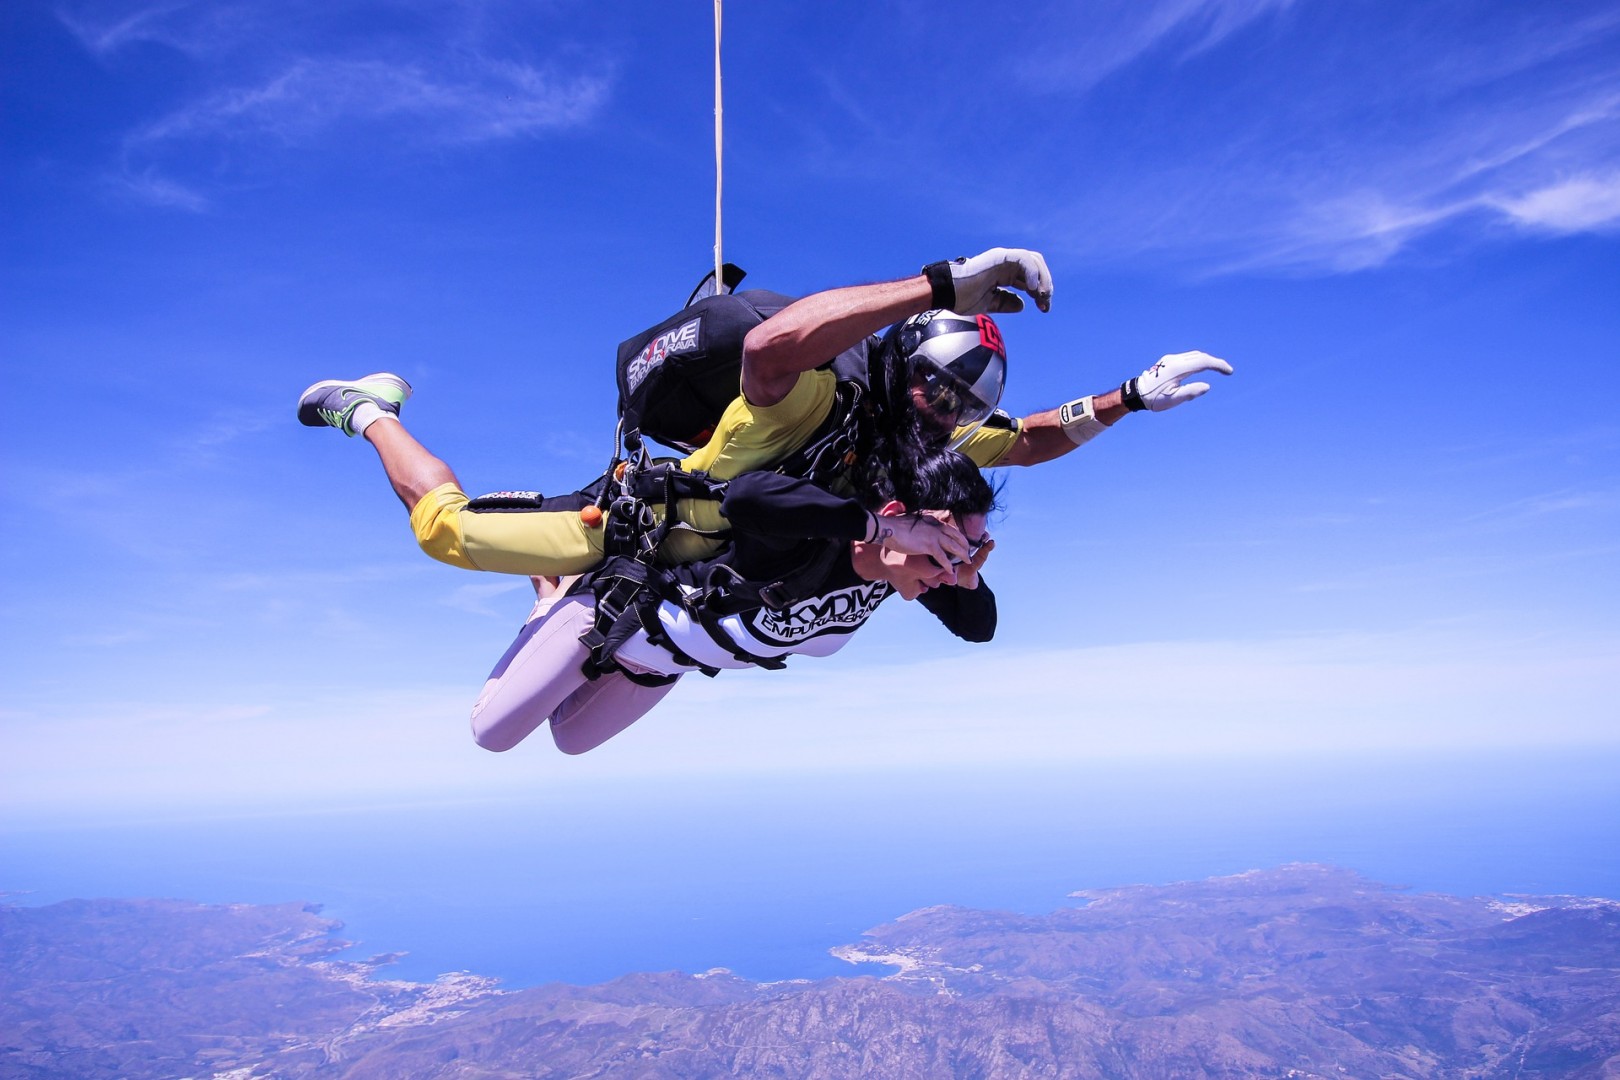 Sports parachuting: how to practice